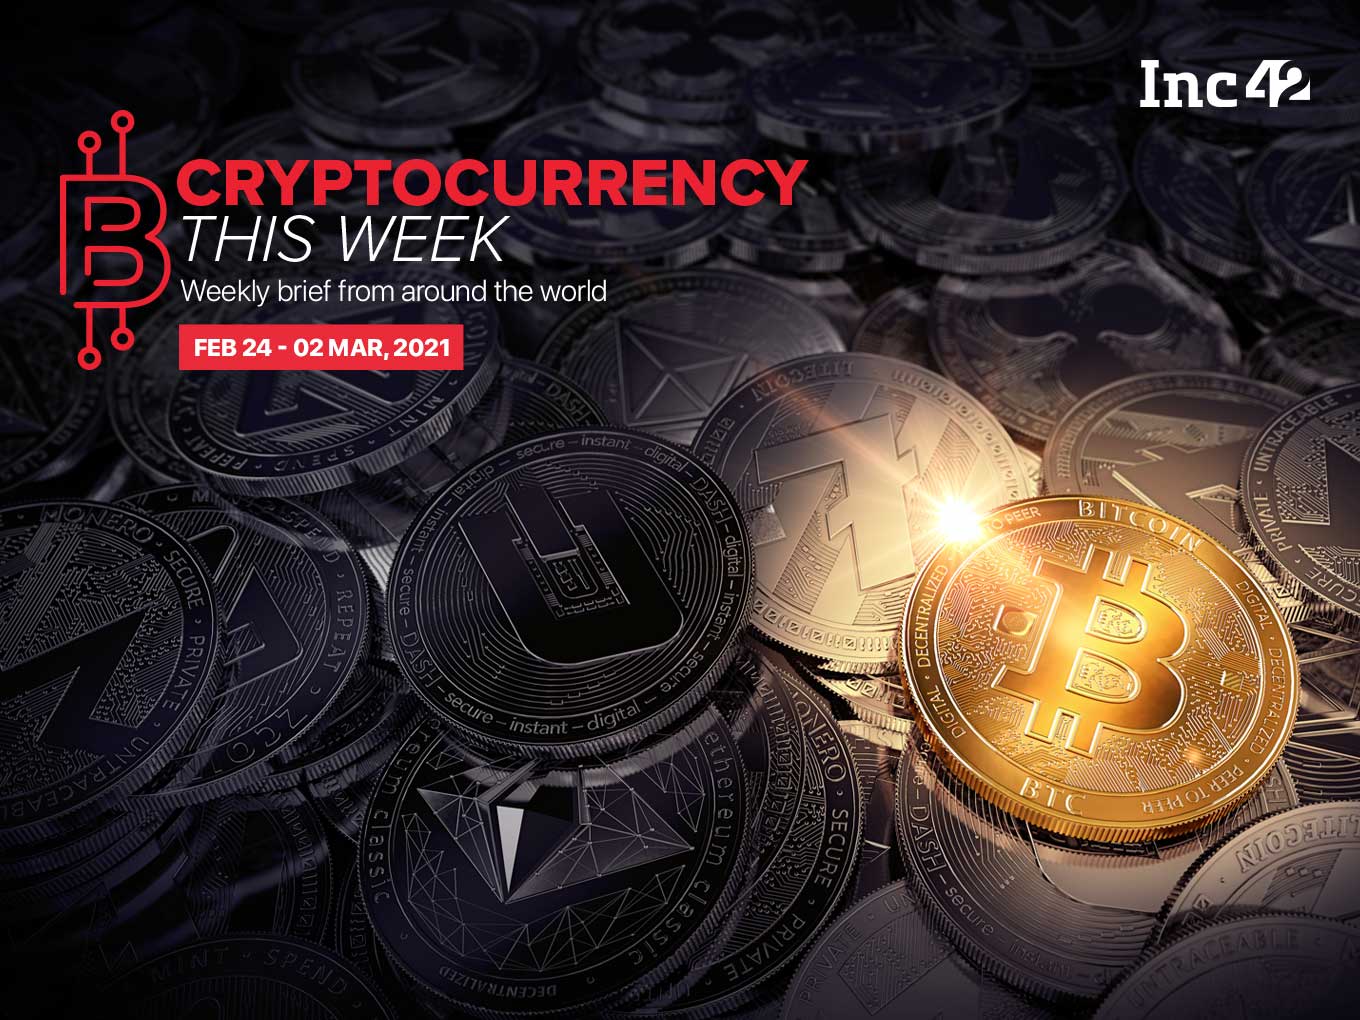 Cryptocurrency This Week: Weighing The Impact Of A Potential Ban, How To Tax Crypto & More